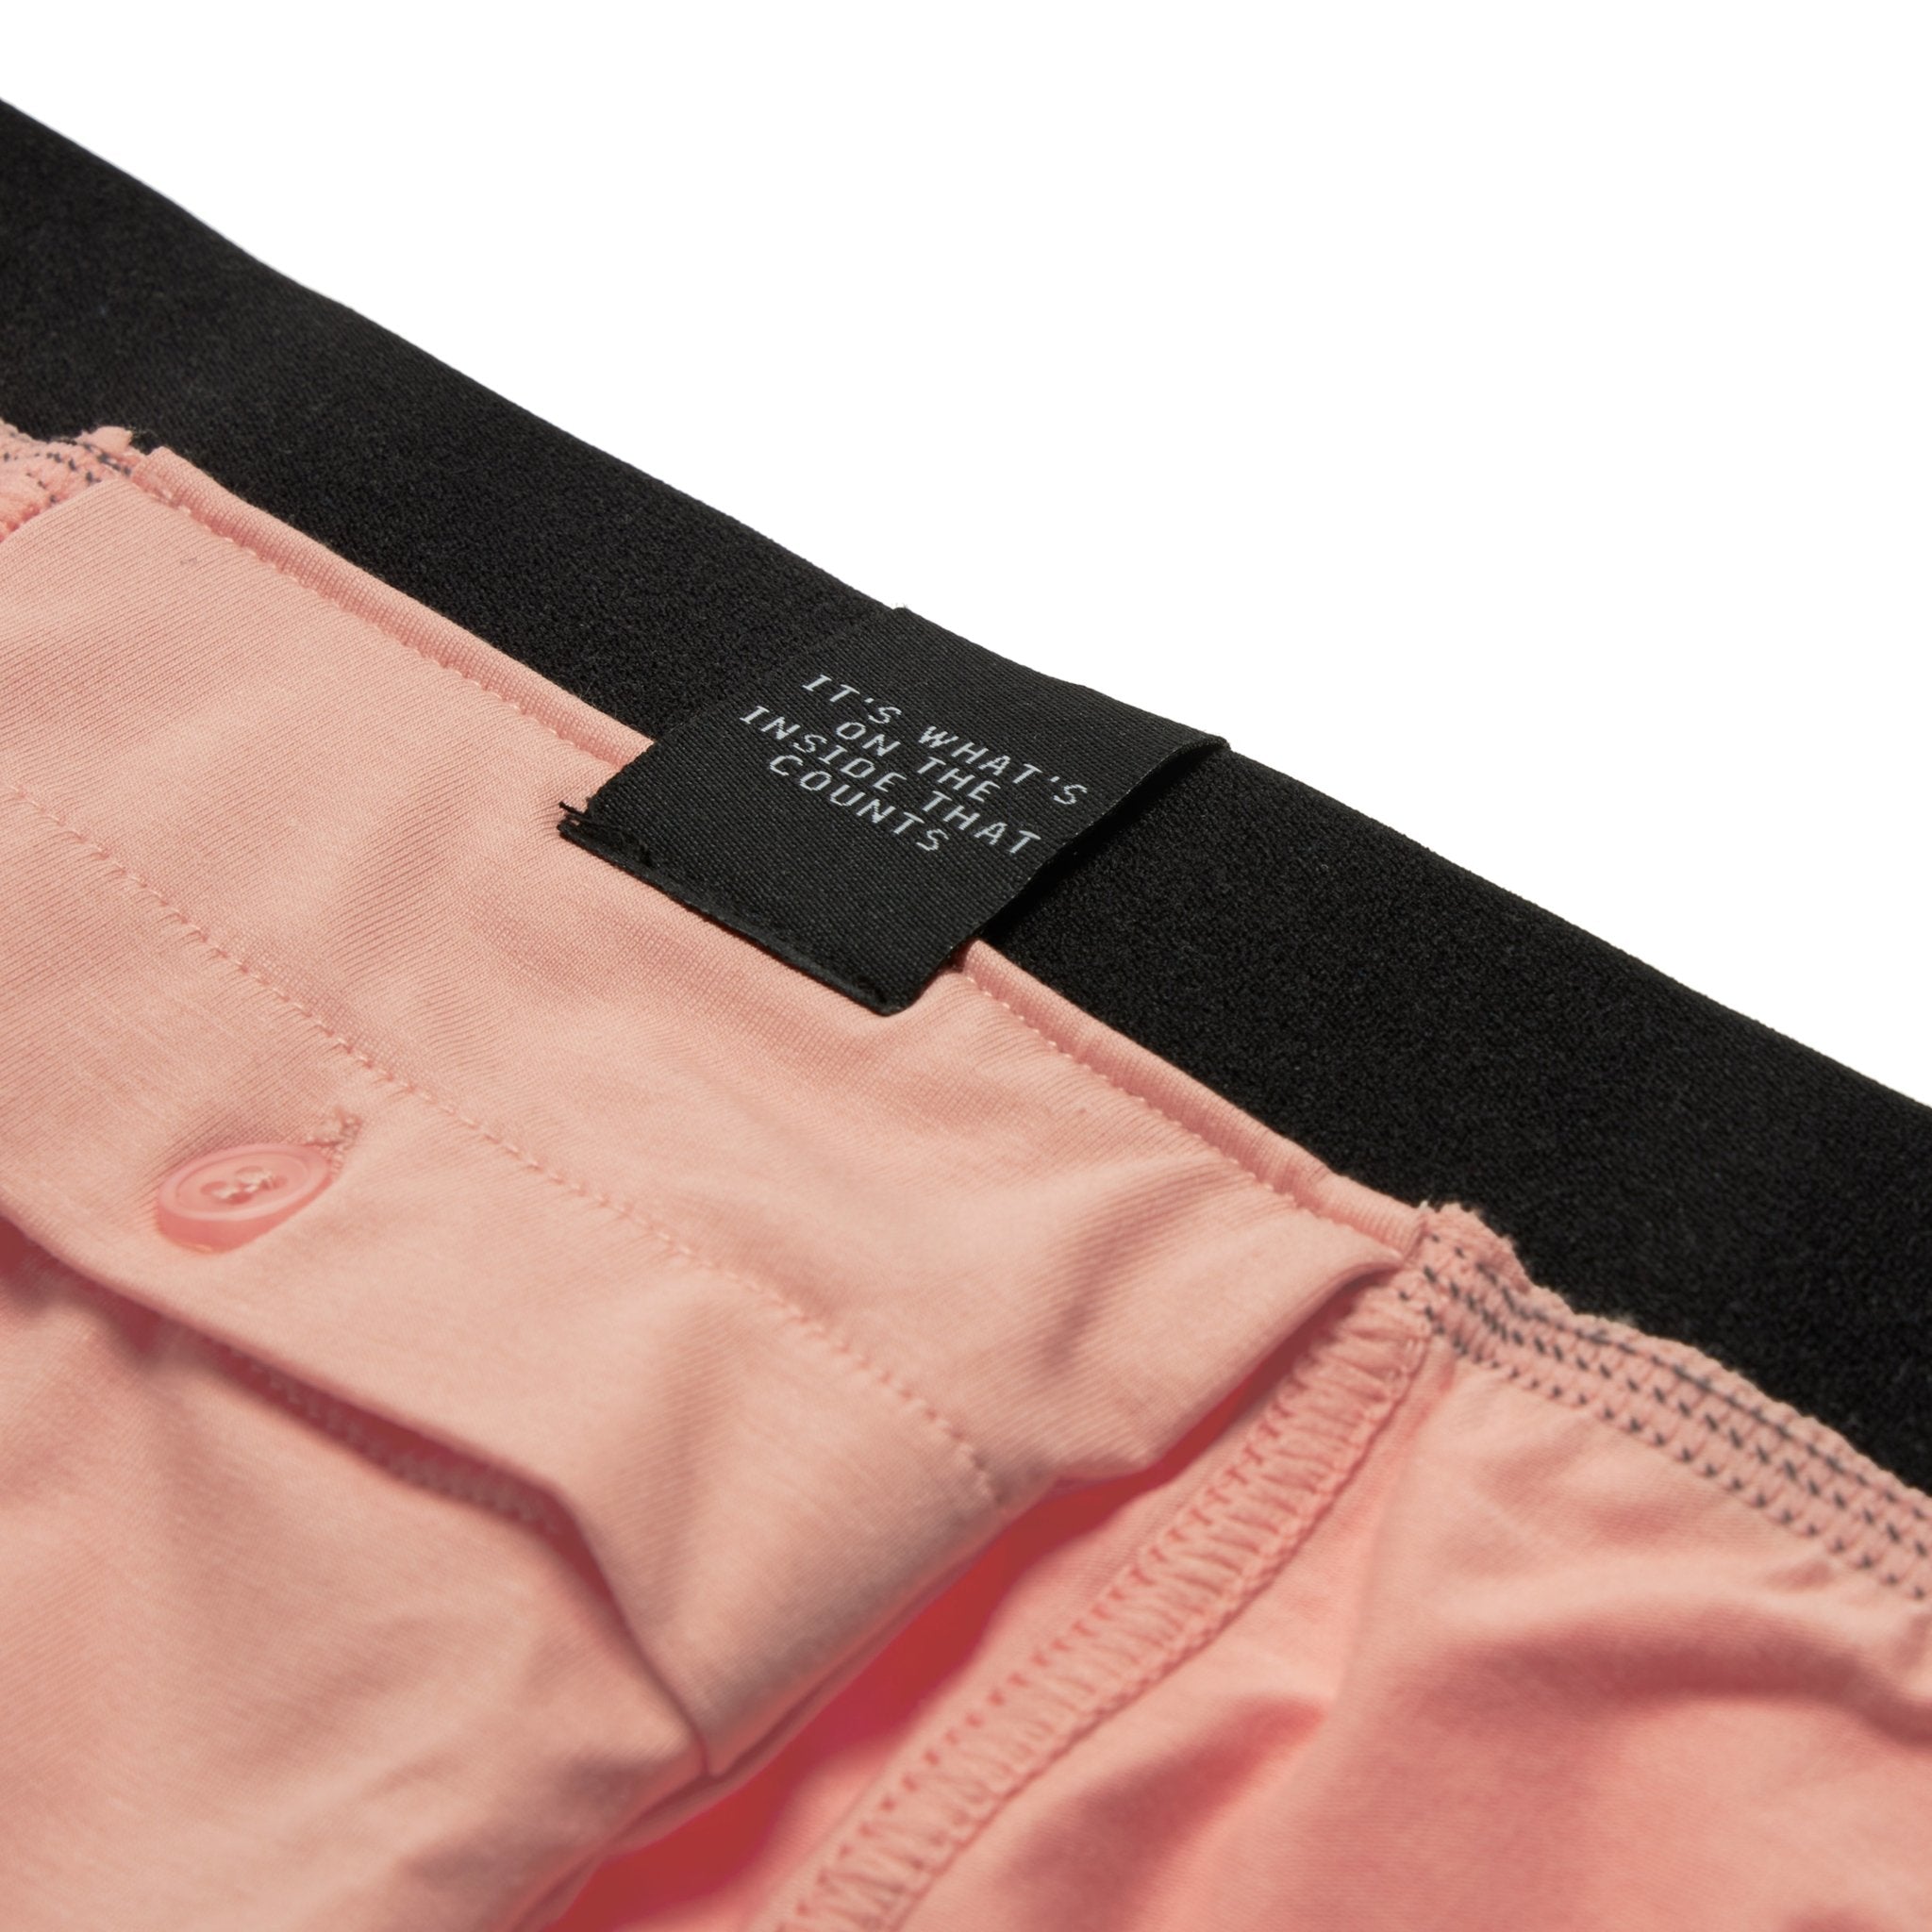 Salmon Pink All-In-One Packing Boxers